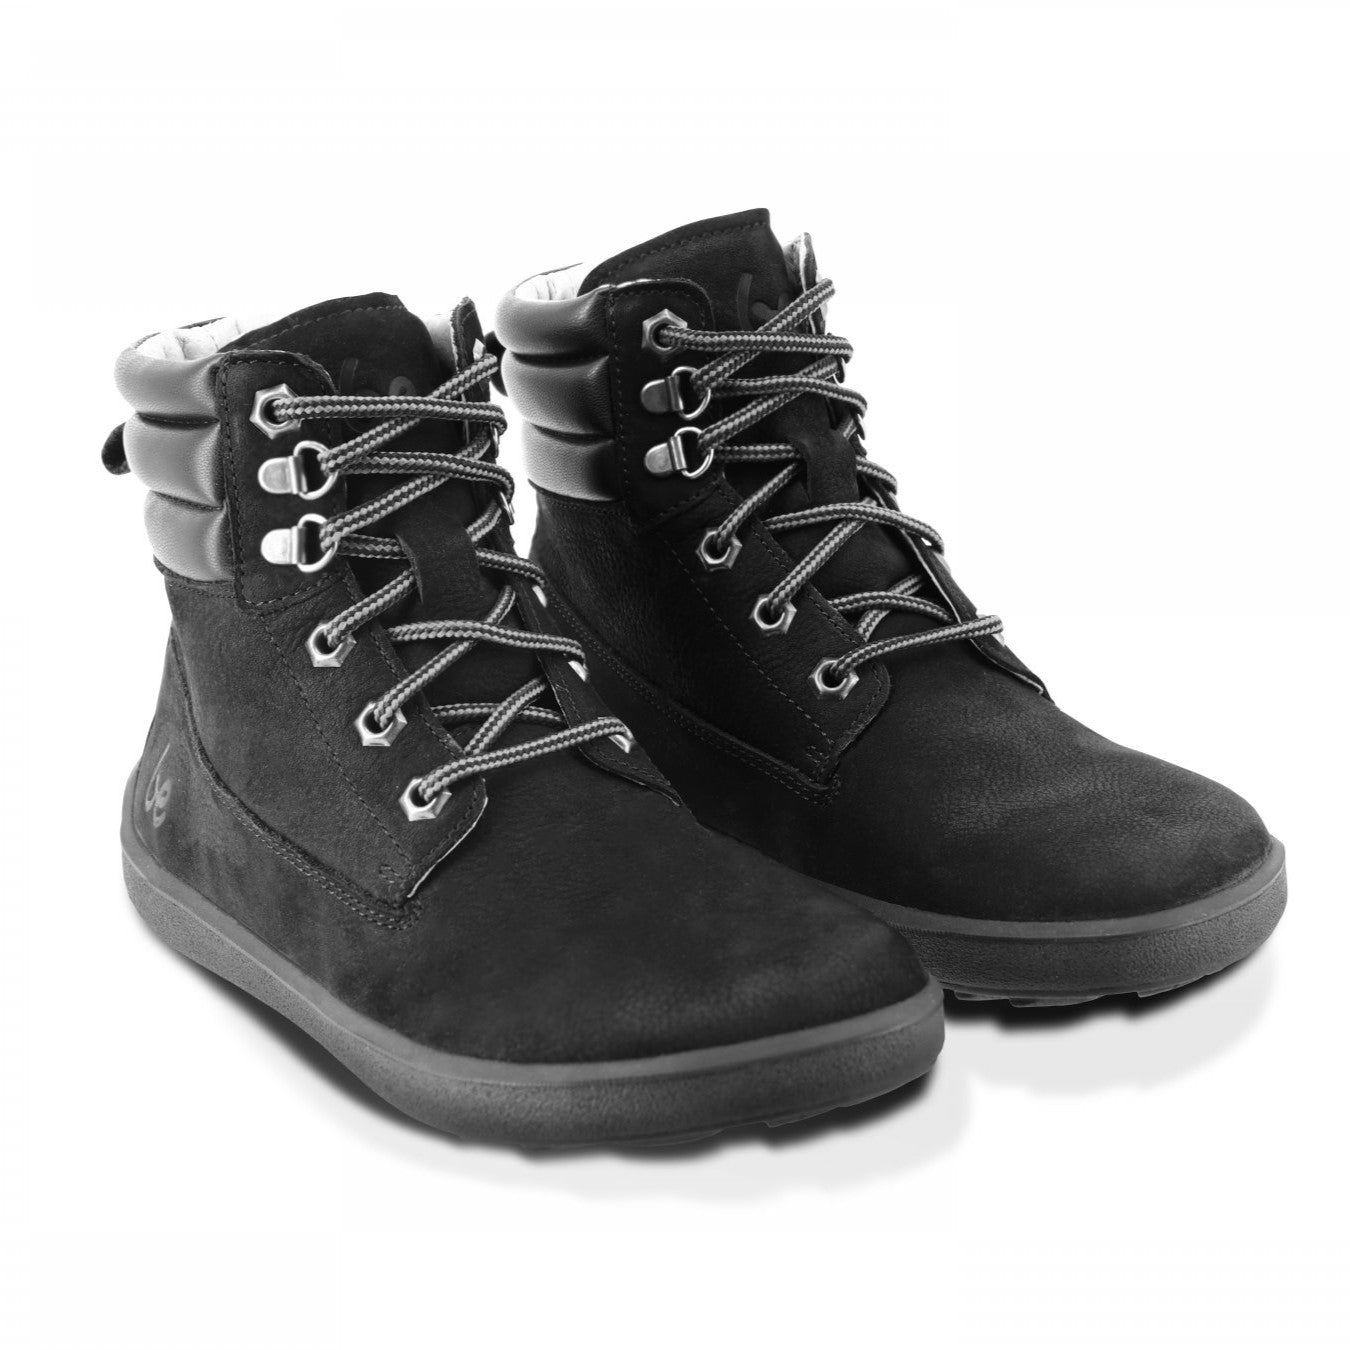 A photo of Be Lenka Nevada Boots made from nubuck leather and rubber soles. The boots are black in color, they are combat boot style with laces a padded color and a chunky eyelets. Both boot are shown beside each other angled slightly to the right against a white background. #color_black